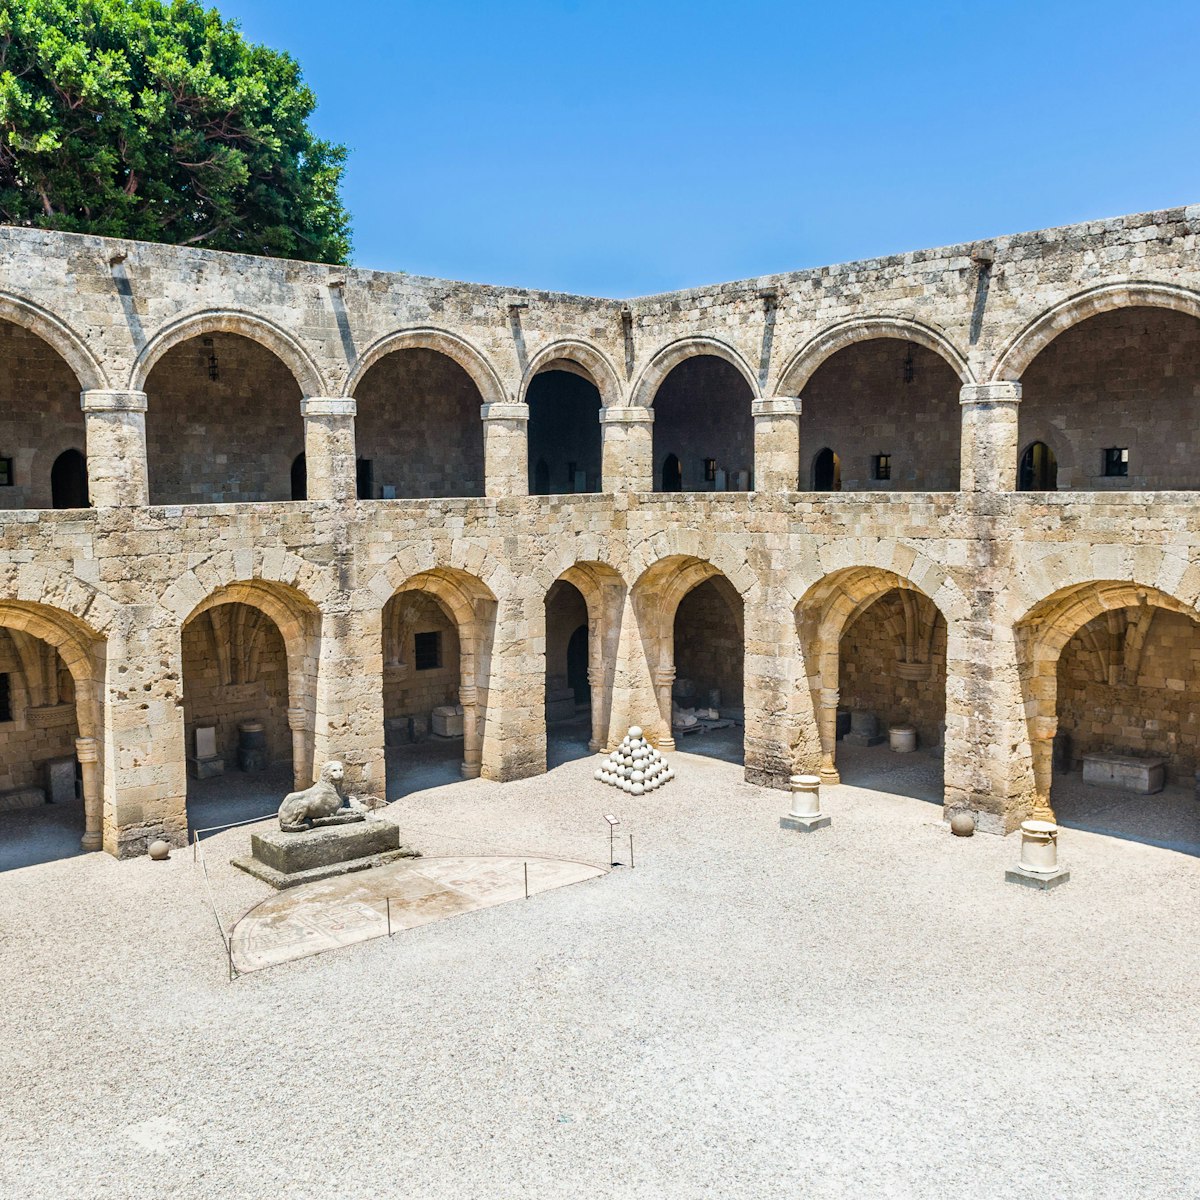 Courtyard at the Archaeological Museum of Rhodes.